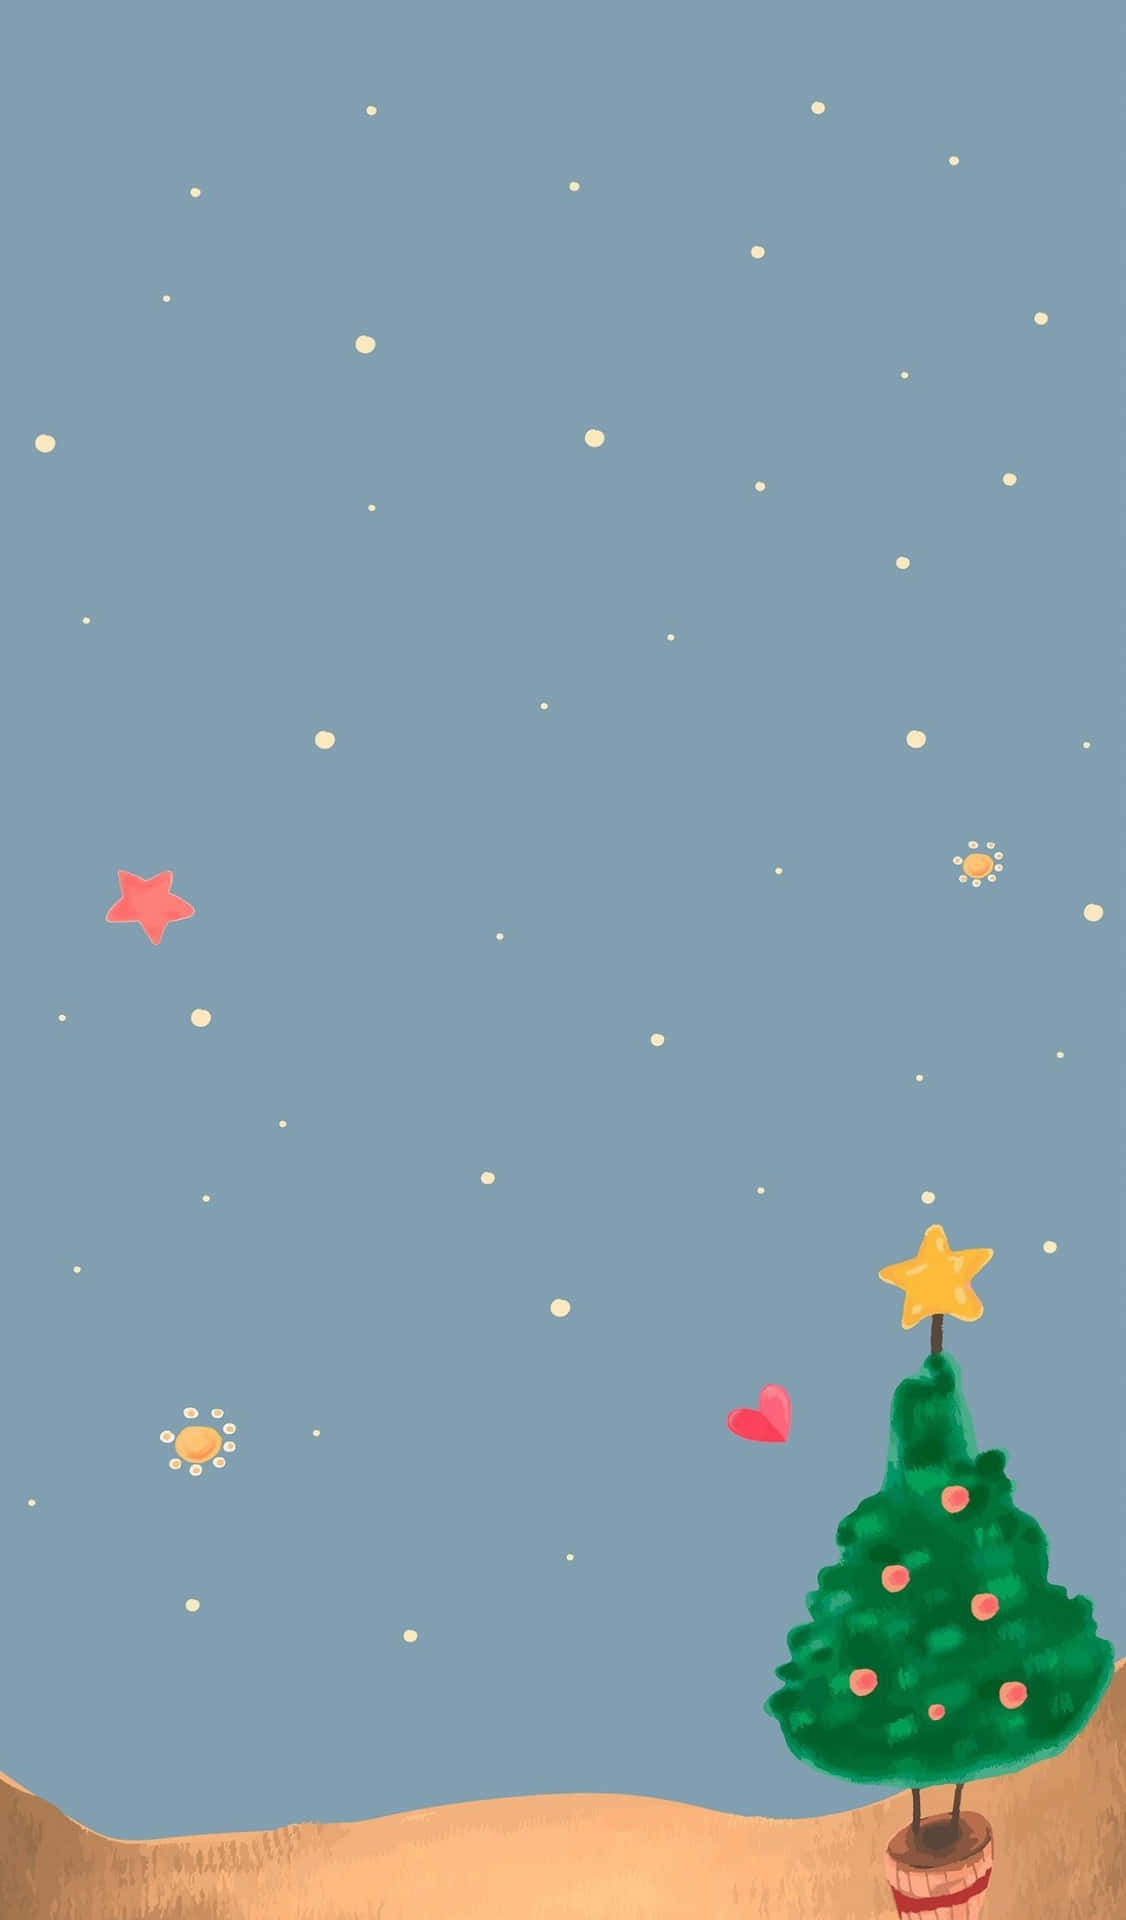 Experience The Joy Of Christmas Through This Cute Smartphone Wallpaper